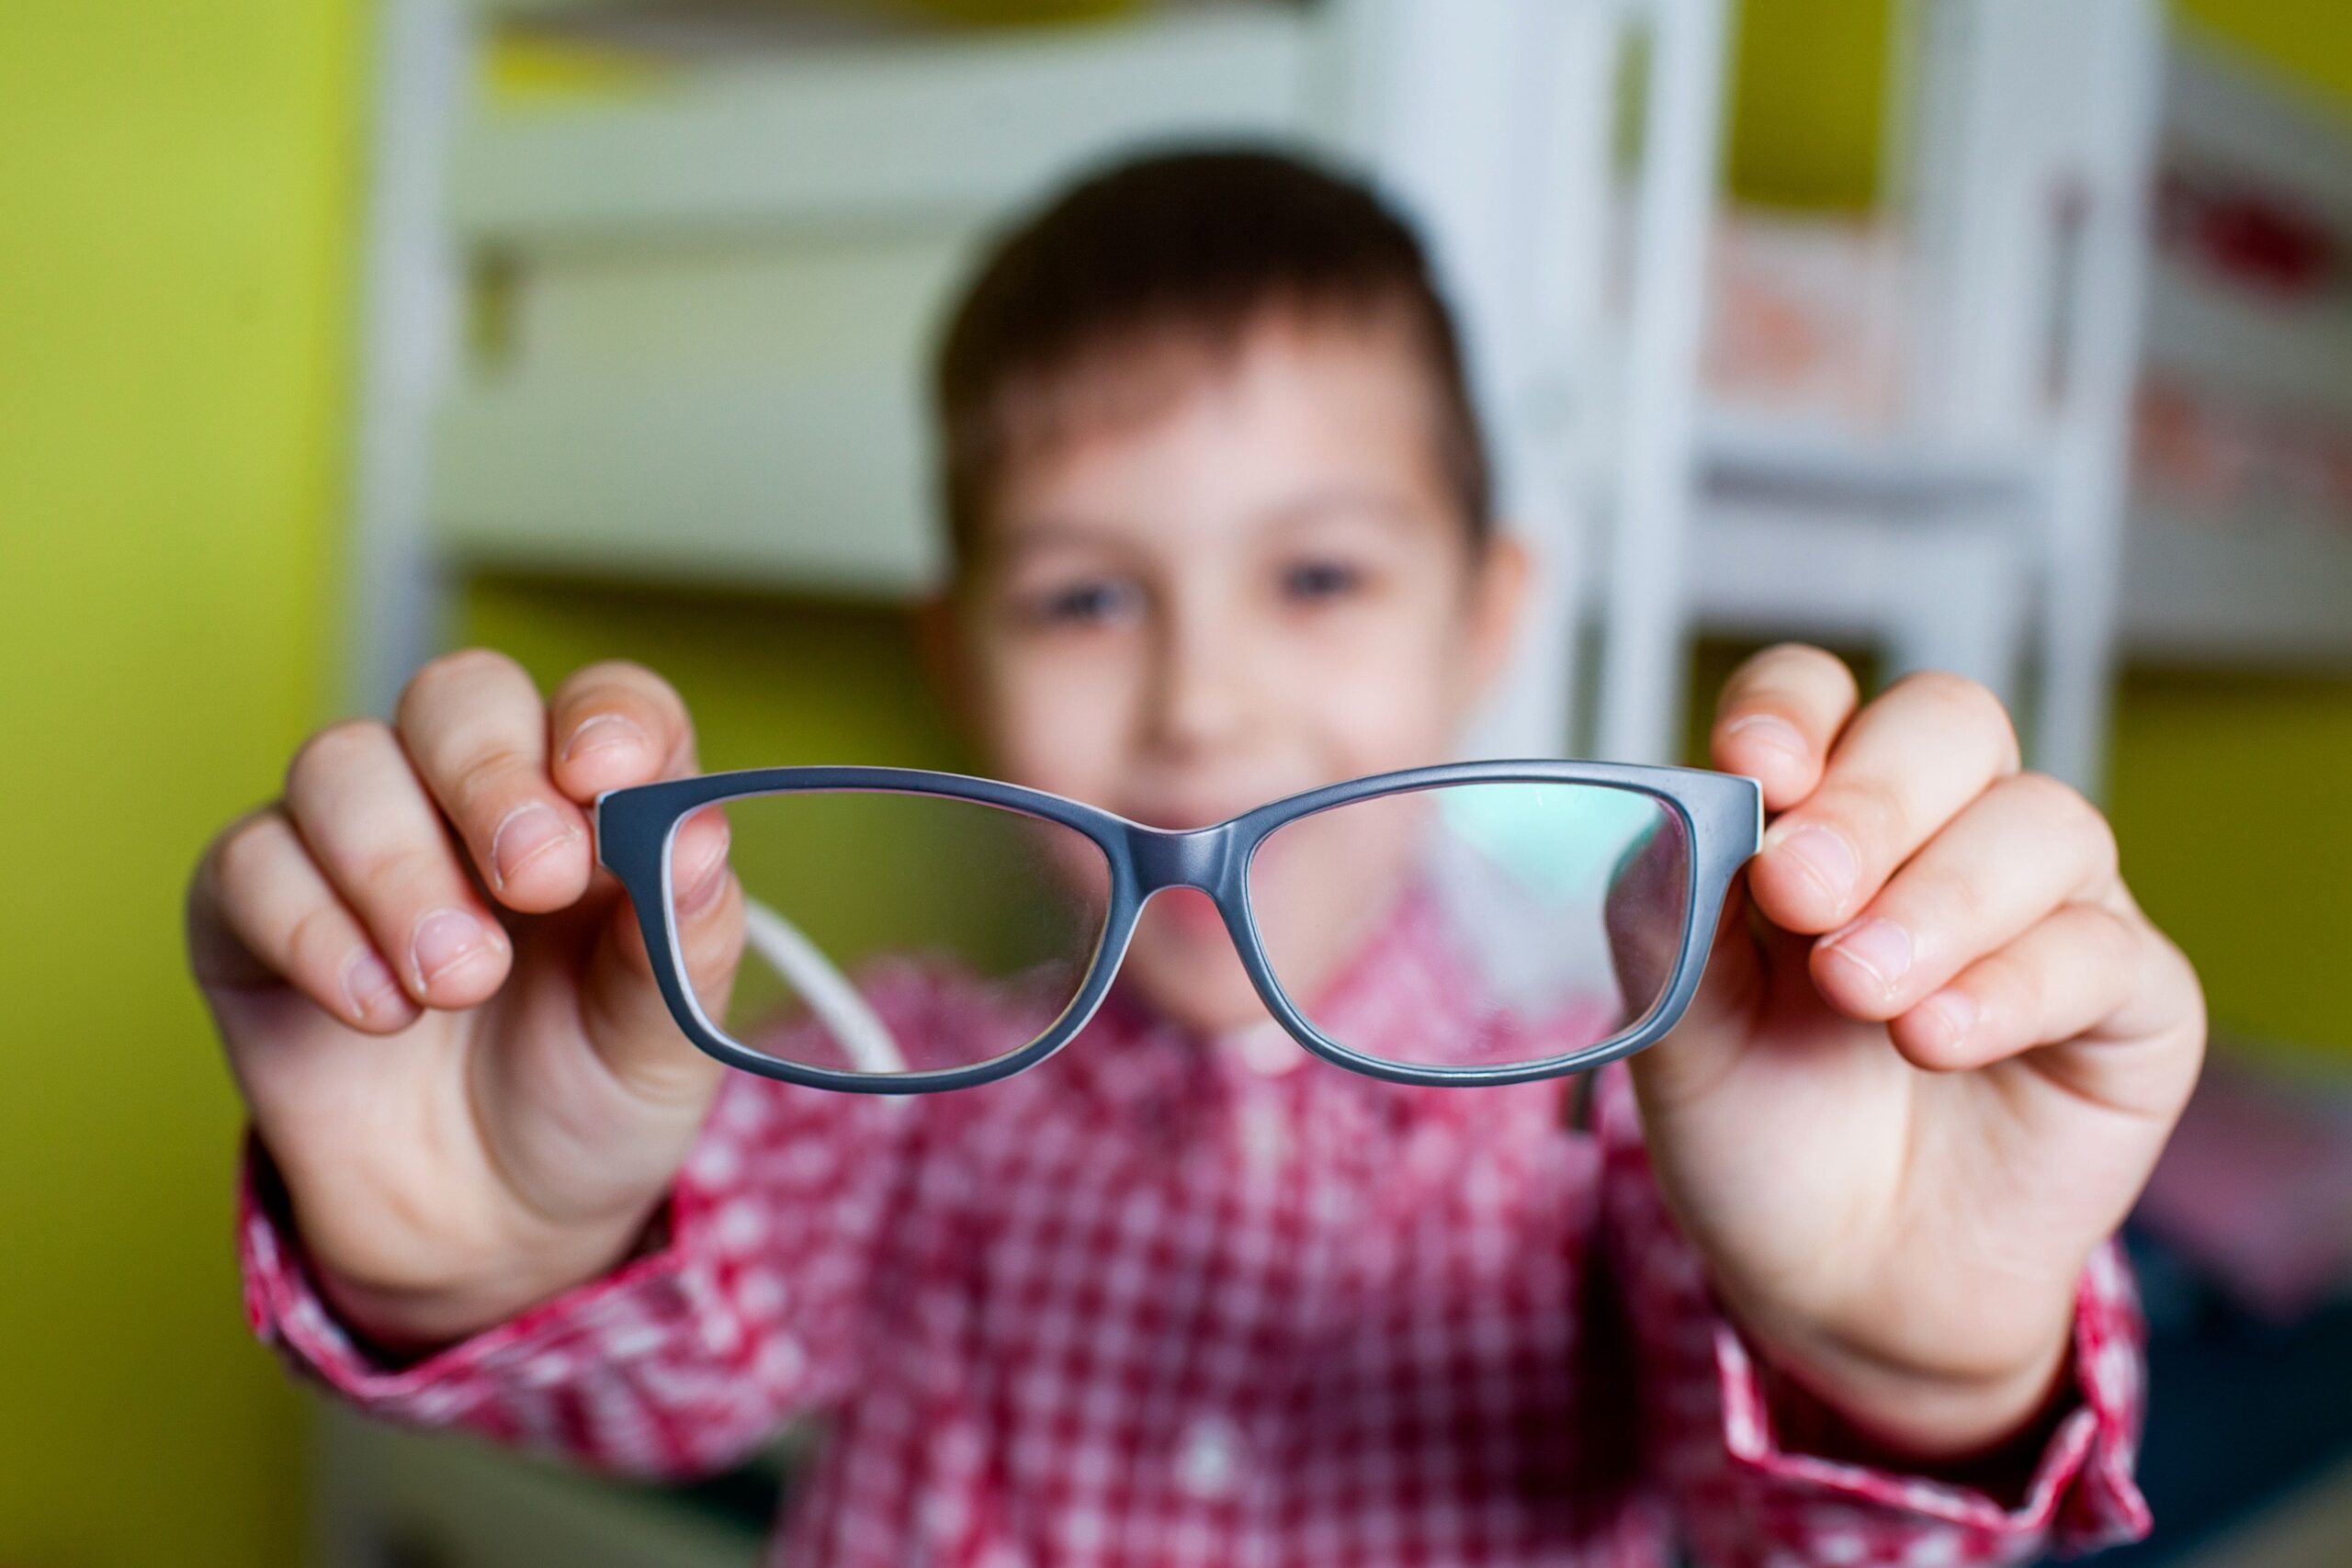 A young boy holding out a pair of glasses in front of him